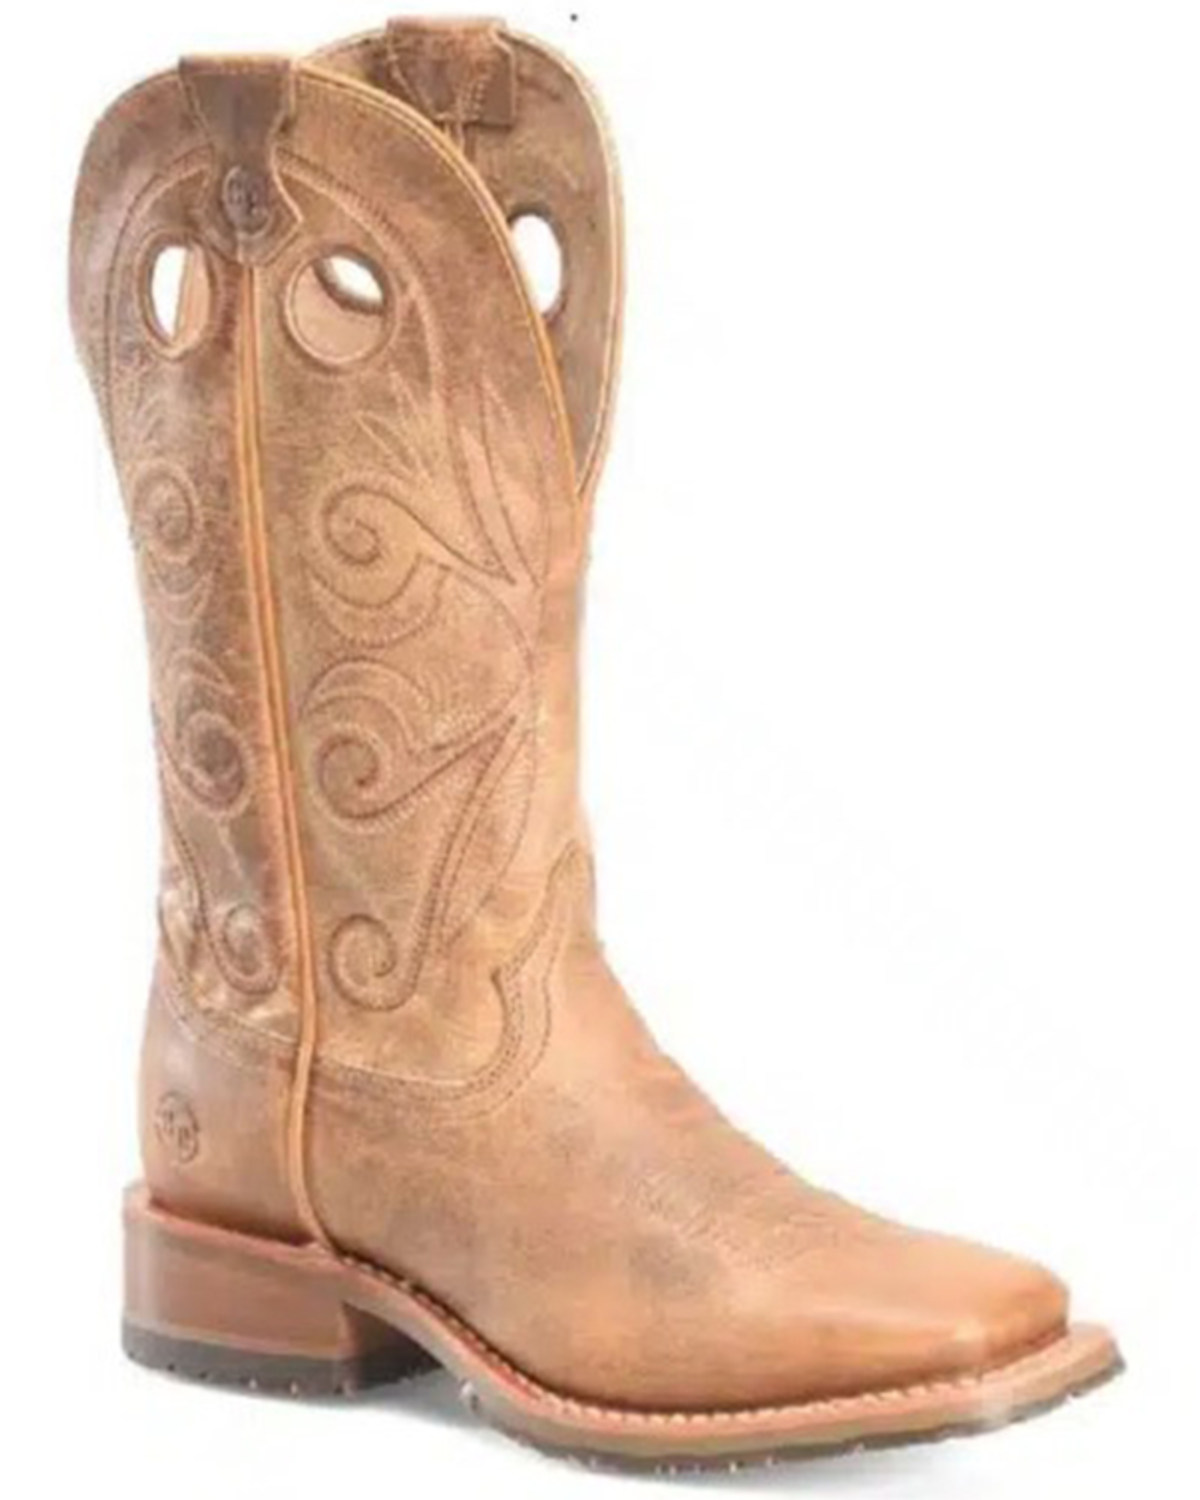 Double H Women's 12" Kenna Slip Resistant Western Boots - Broad Square Toe